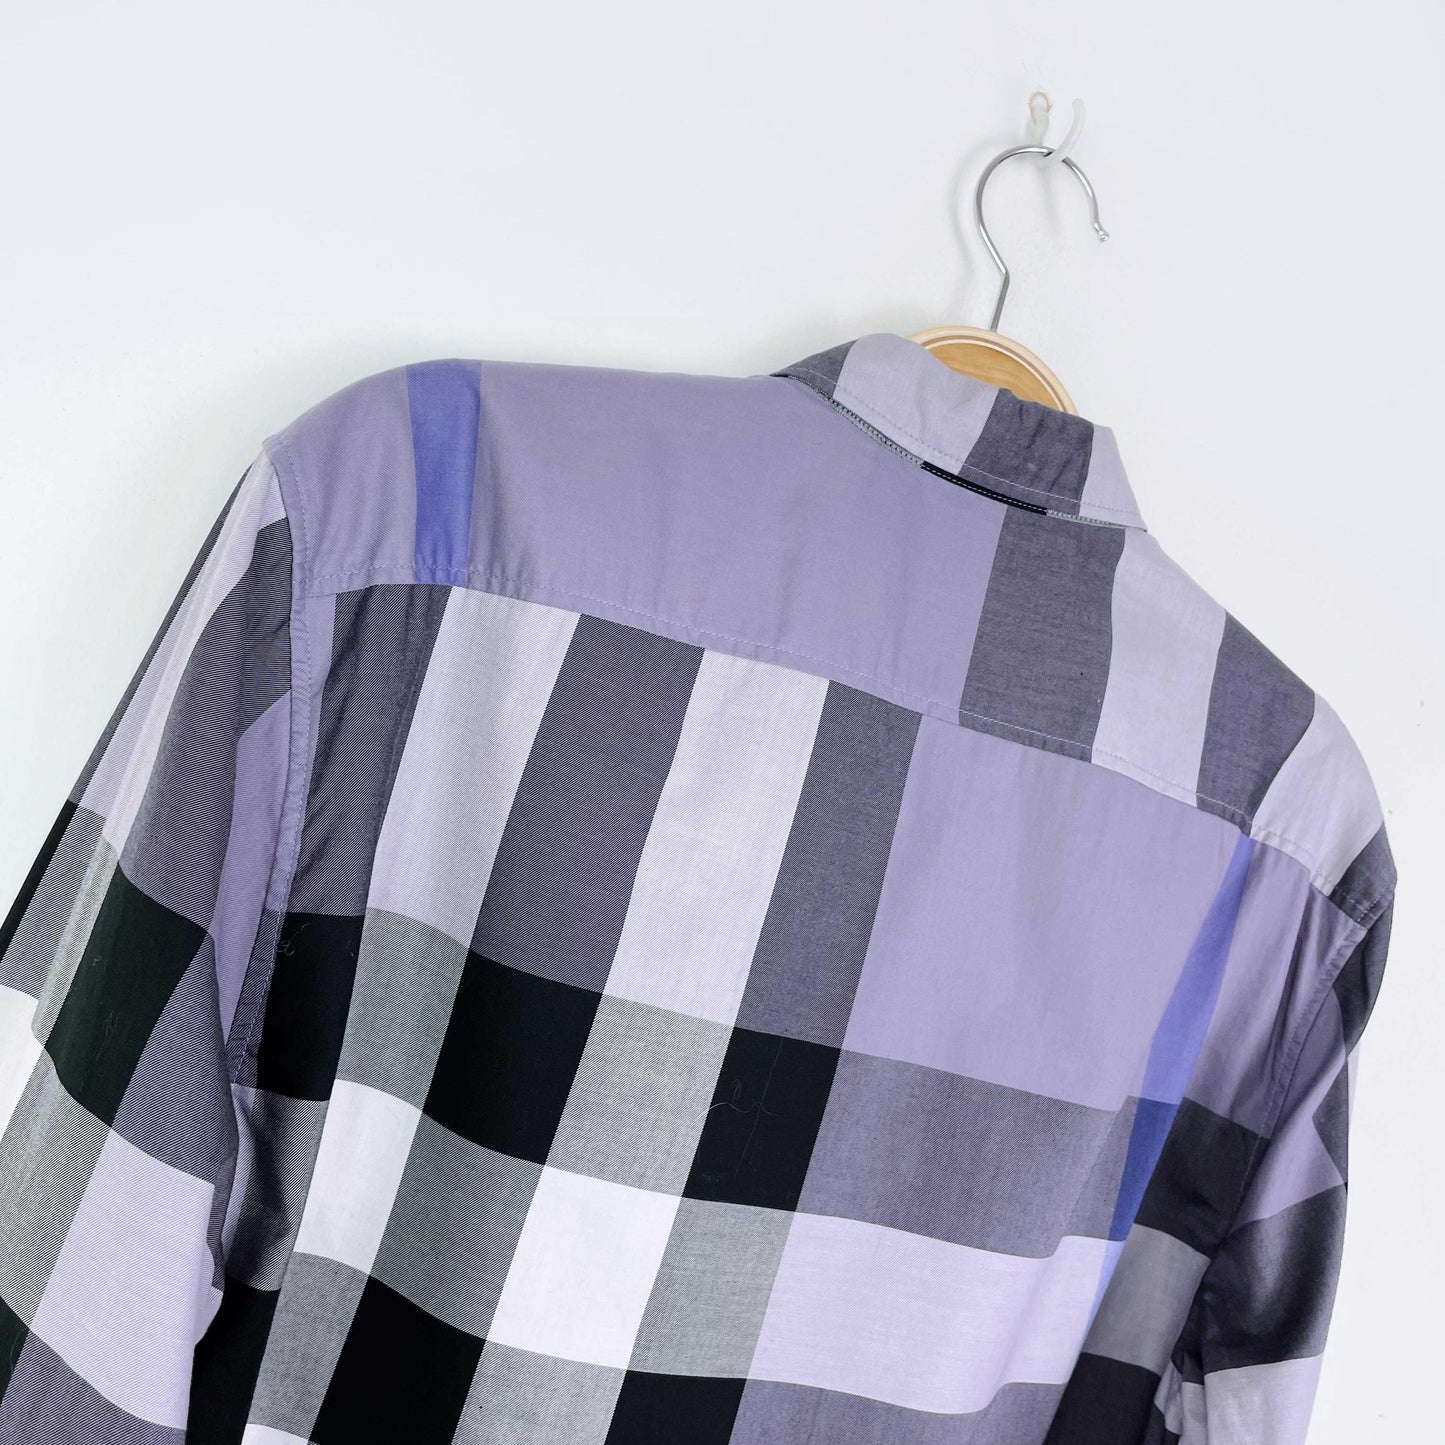 burberry exploded check button down shirt - size small